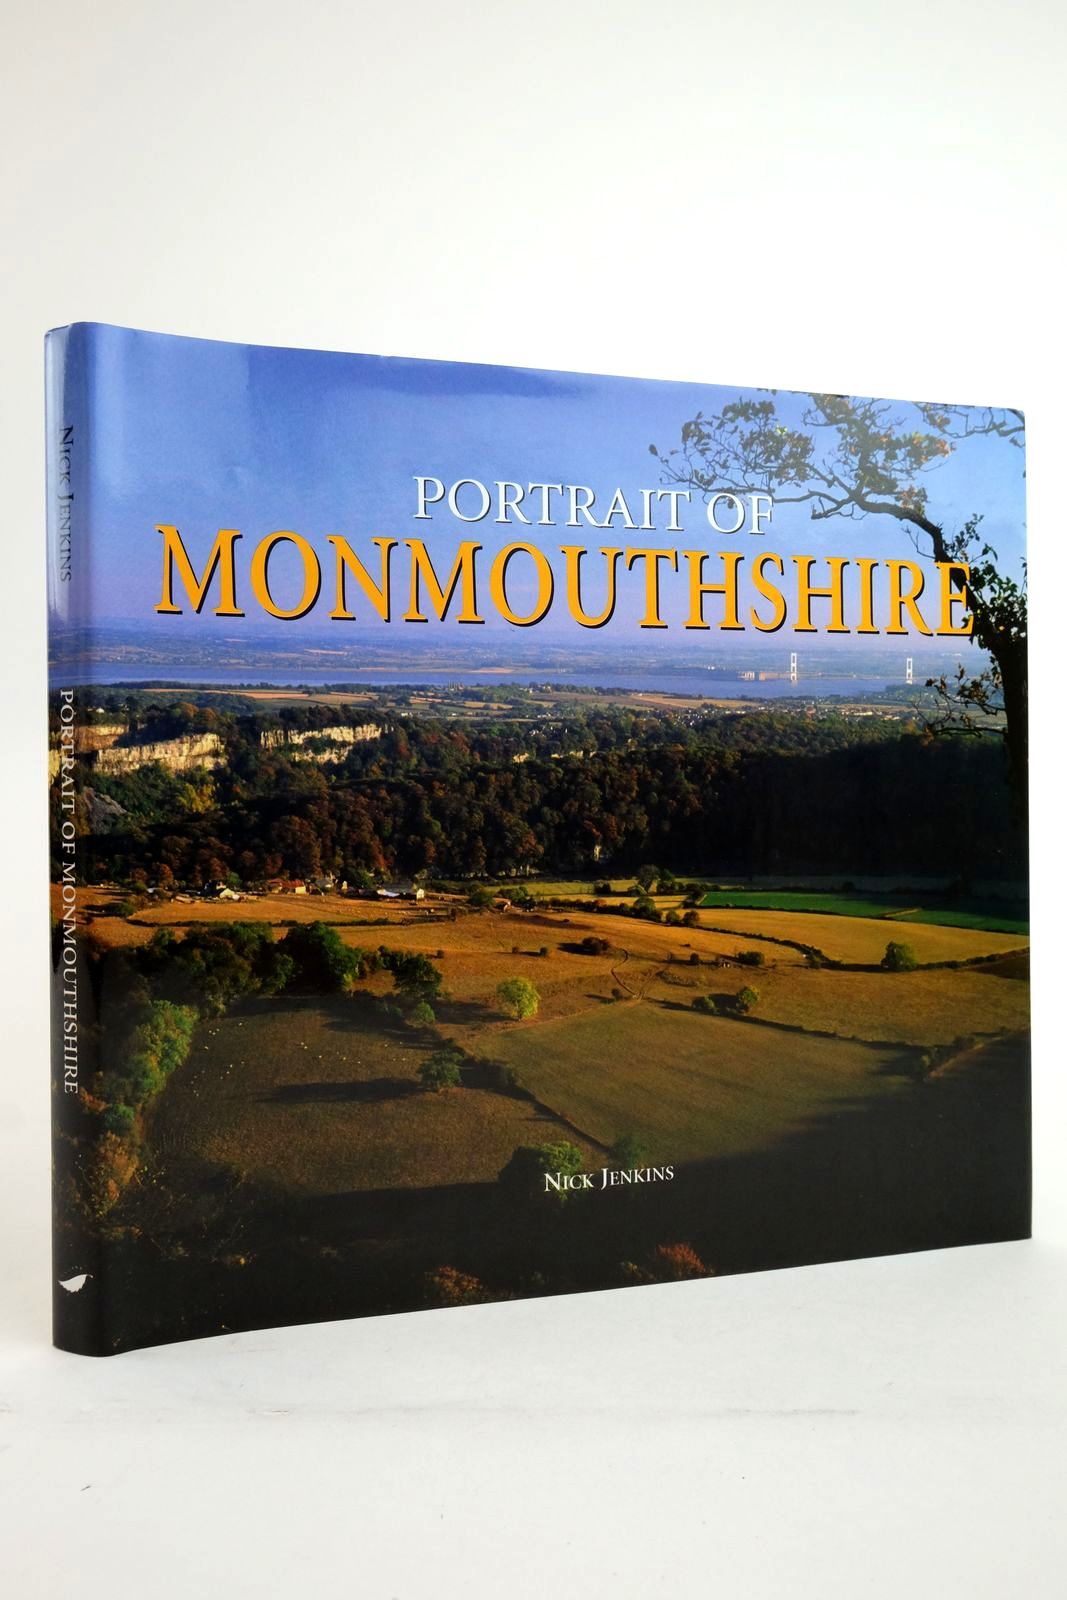 Photo of PORTRAIT OF MONMOUTSHIRE written by Jenkins, Nick published by Halsgrove (STOCK CODE: 2135817)  for sale by Stella & Rose's Books